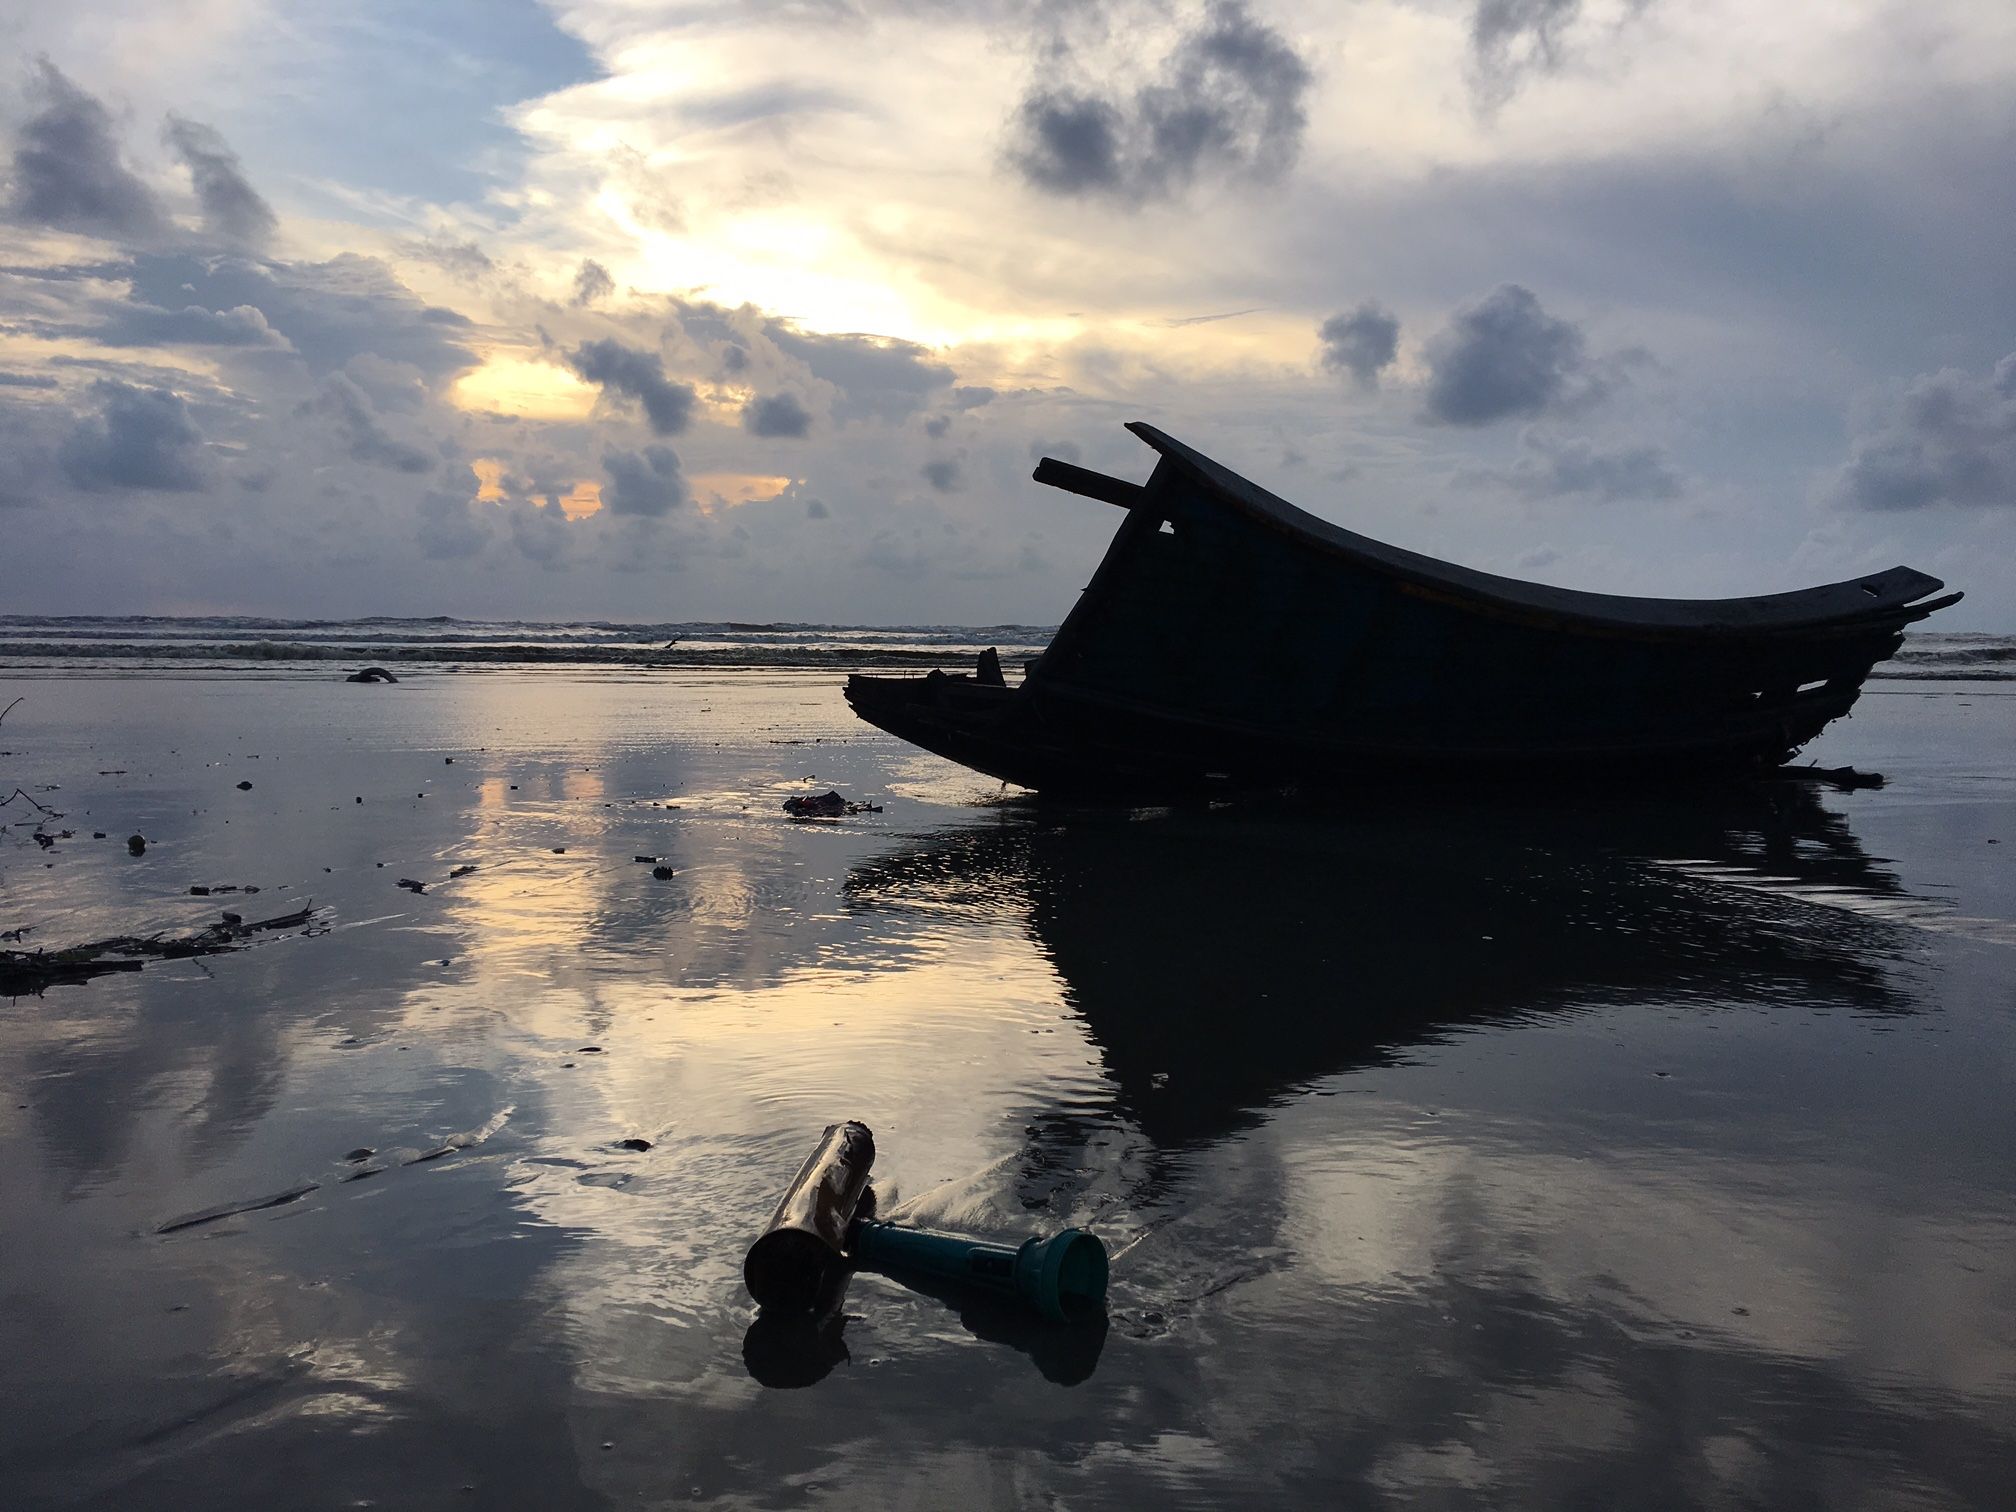 Remnants of a smuggler's boat that capsized in rough seas, drowning at least 23 Rohingya Muslim refugees. September 2017.  